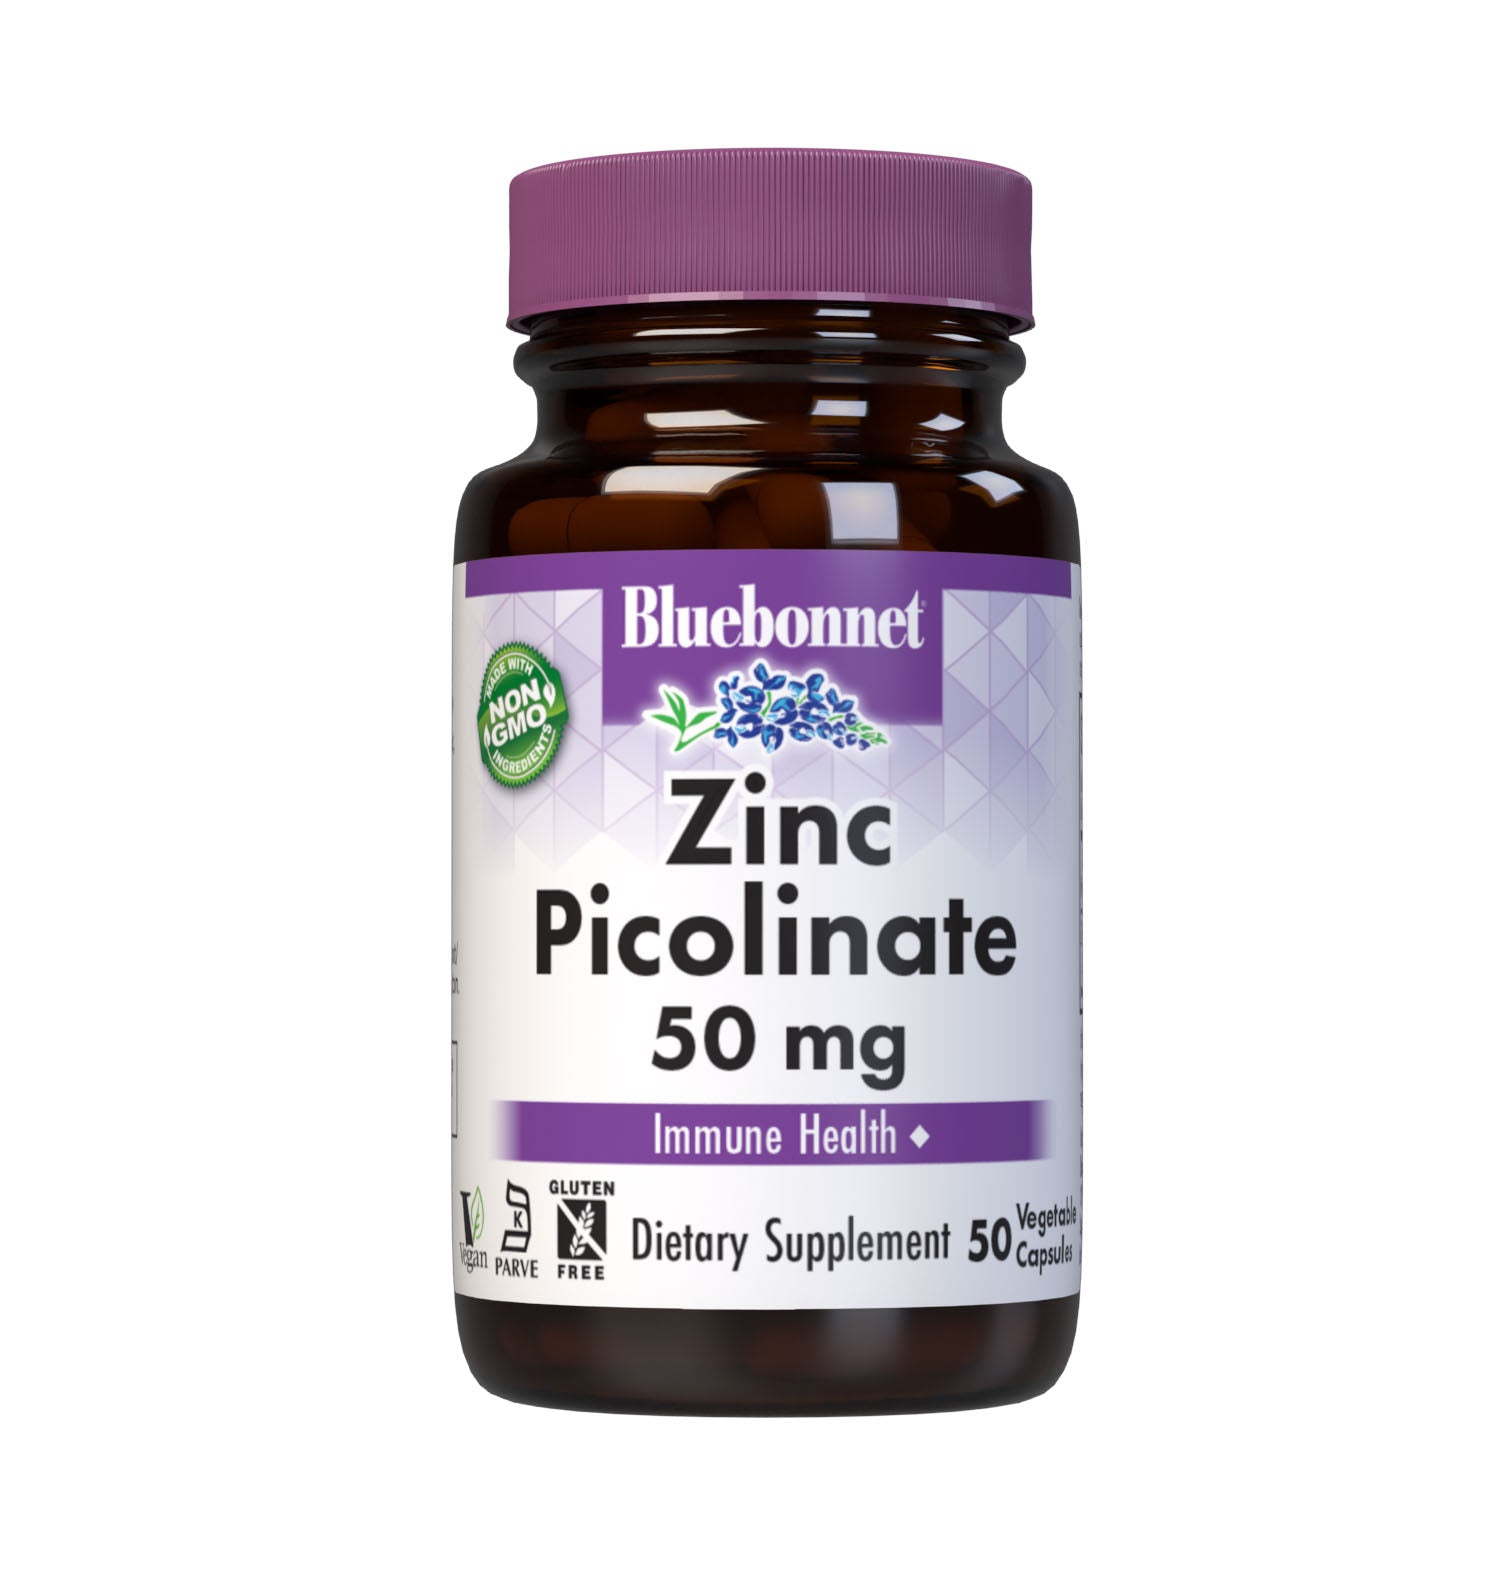 Bluebonnet's Zinc Picolinate 50 mg 50 Vegetable Capsules are formulated with zinc in a chelate of picolinic acid. Zinc is an essential element that is necessary for immune health and enzyme function. #size_50 count